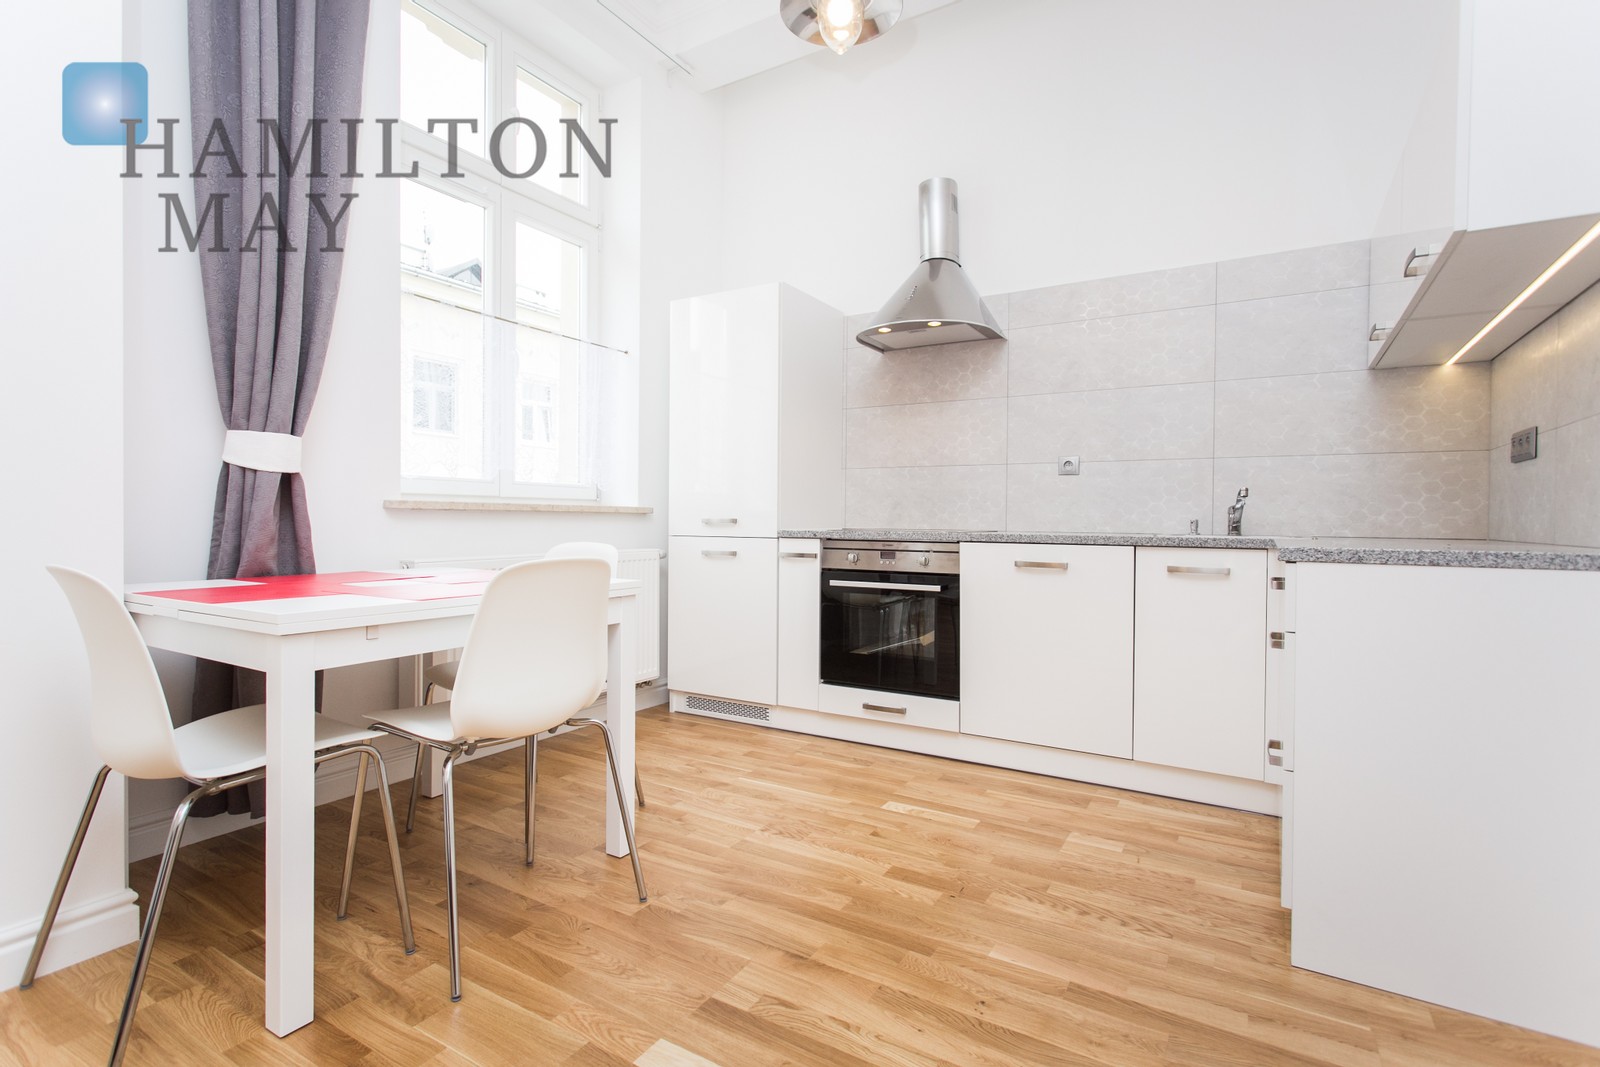 One bedroom apartment in a renovated tenement building Krakow for sale